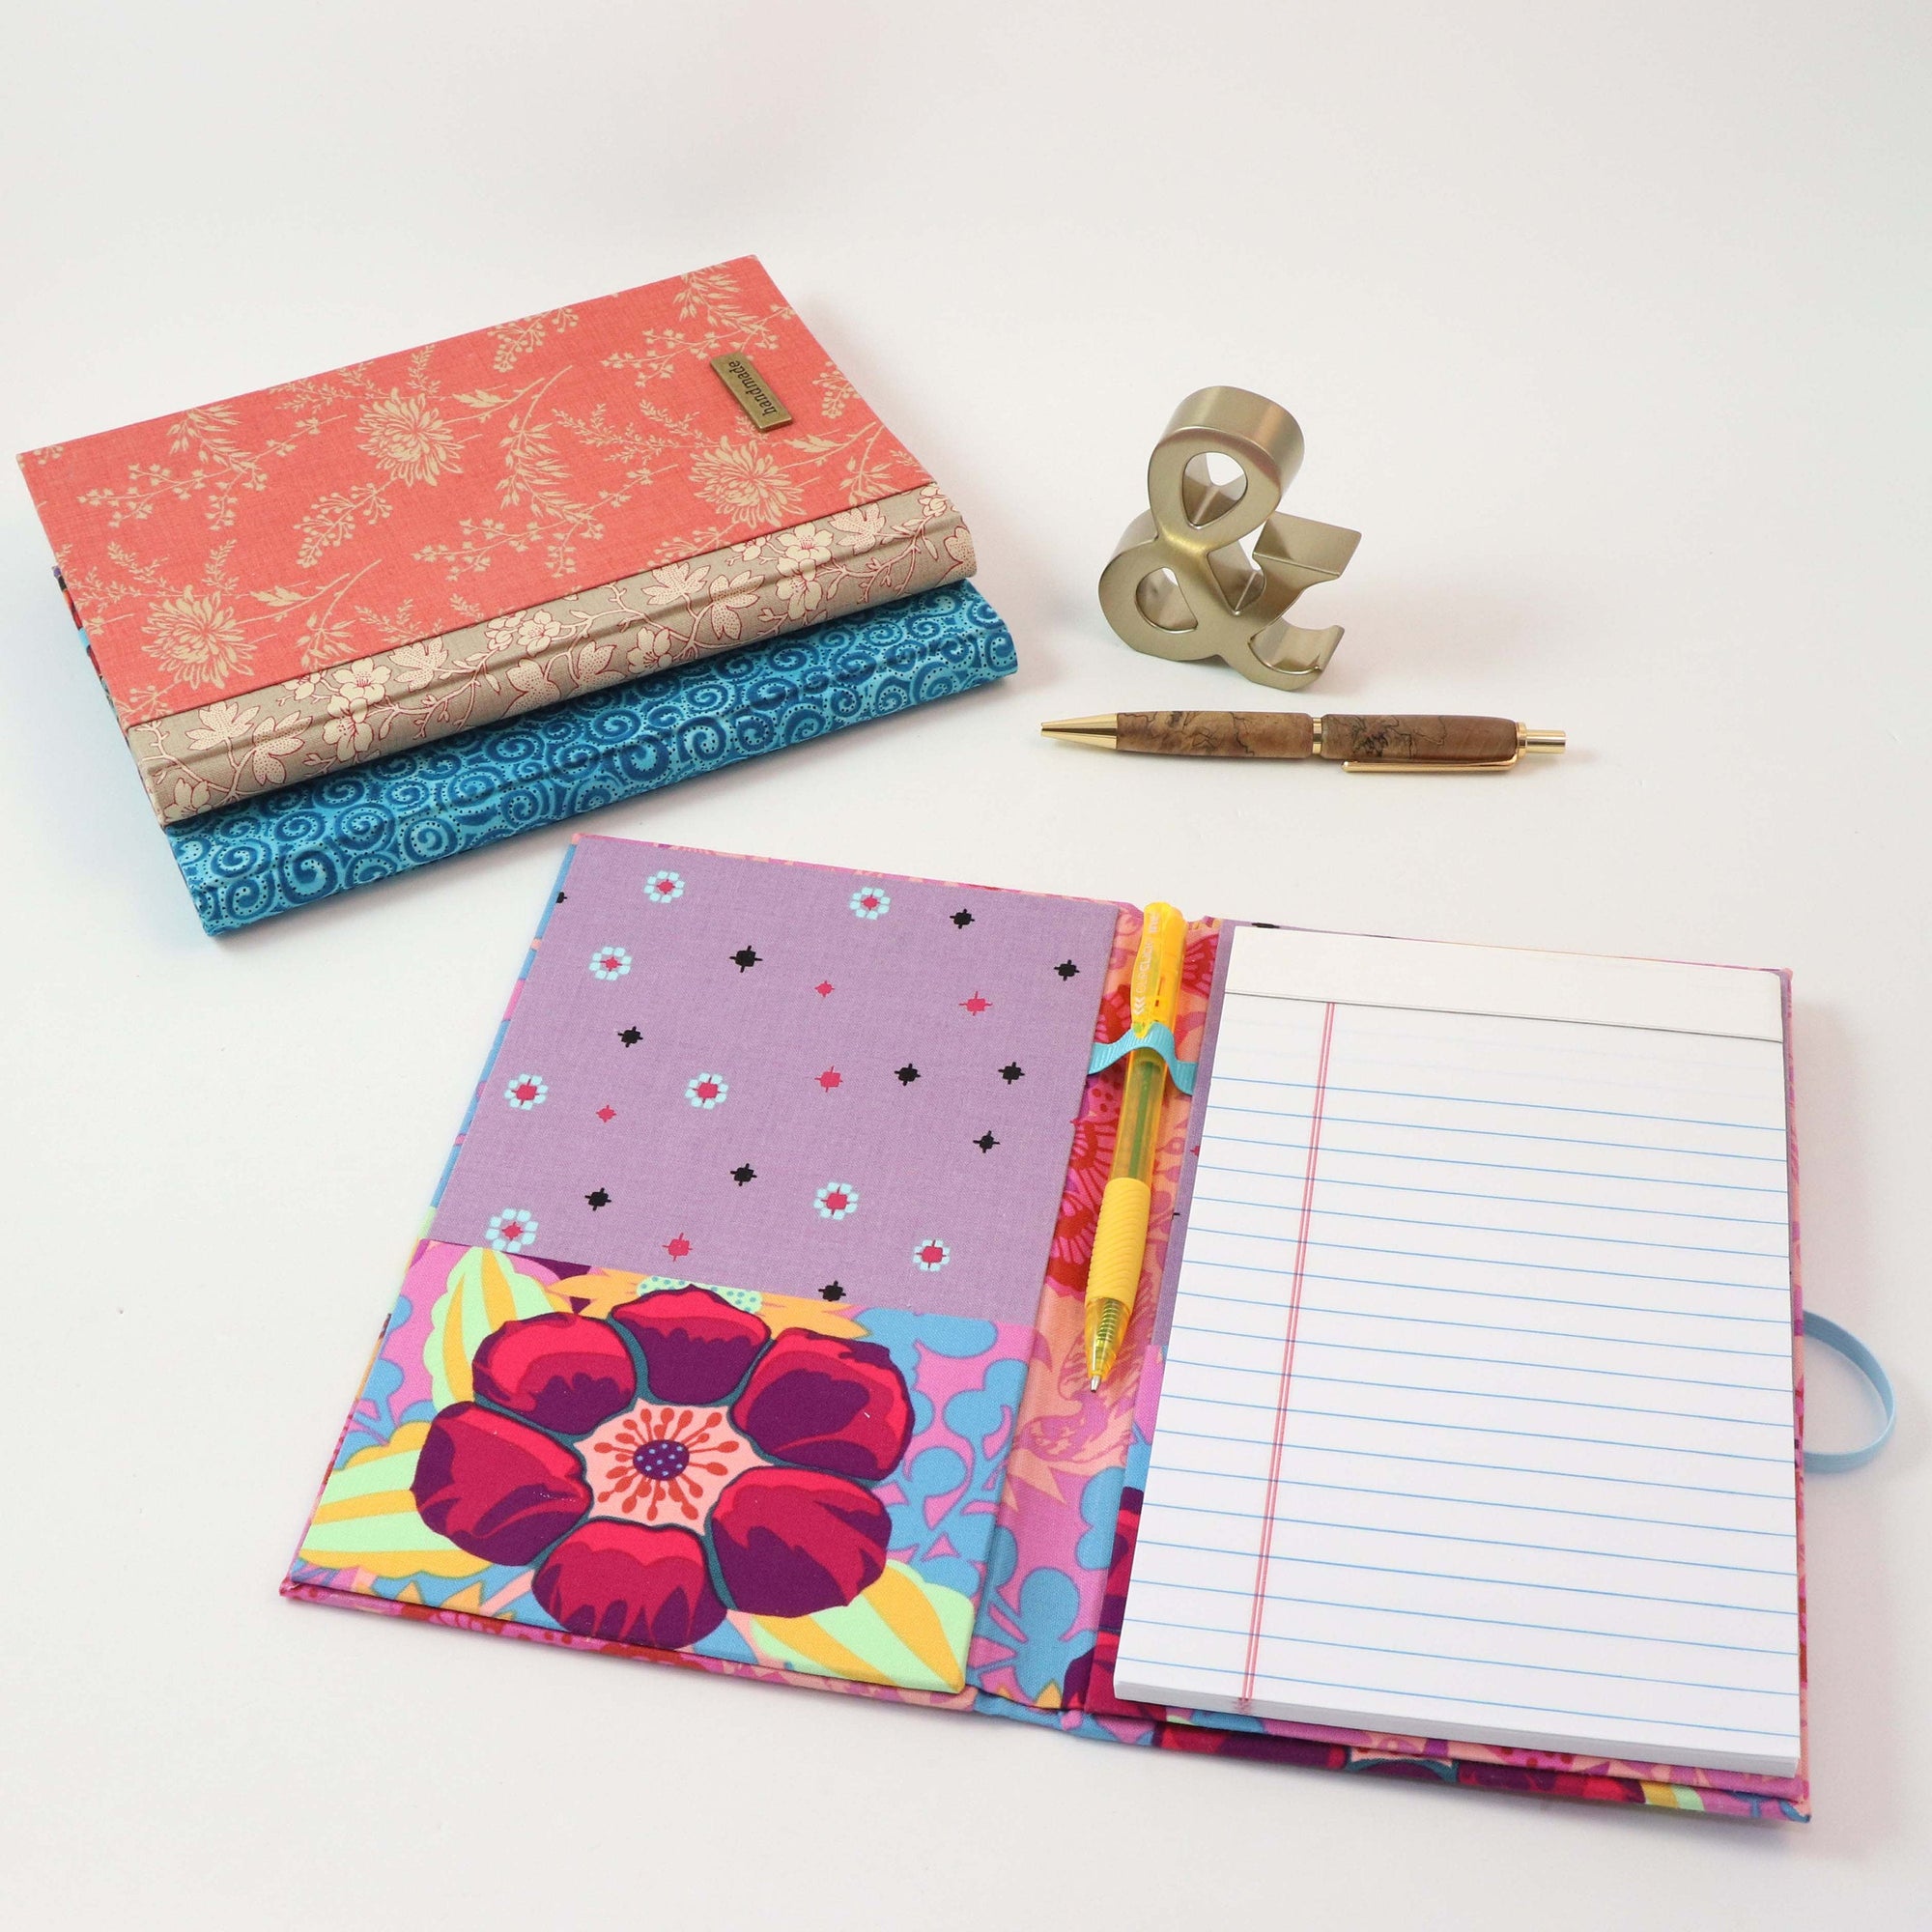 Handmade Notebook Cover with Spiral Notebook  Diy notebook cover, Handmade  notebook, Diy notebook